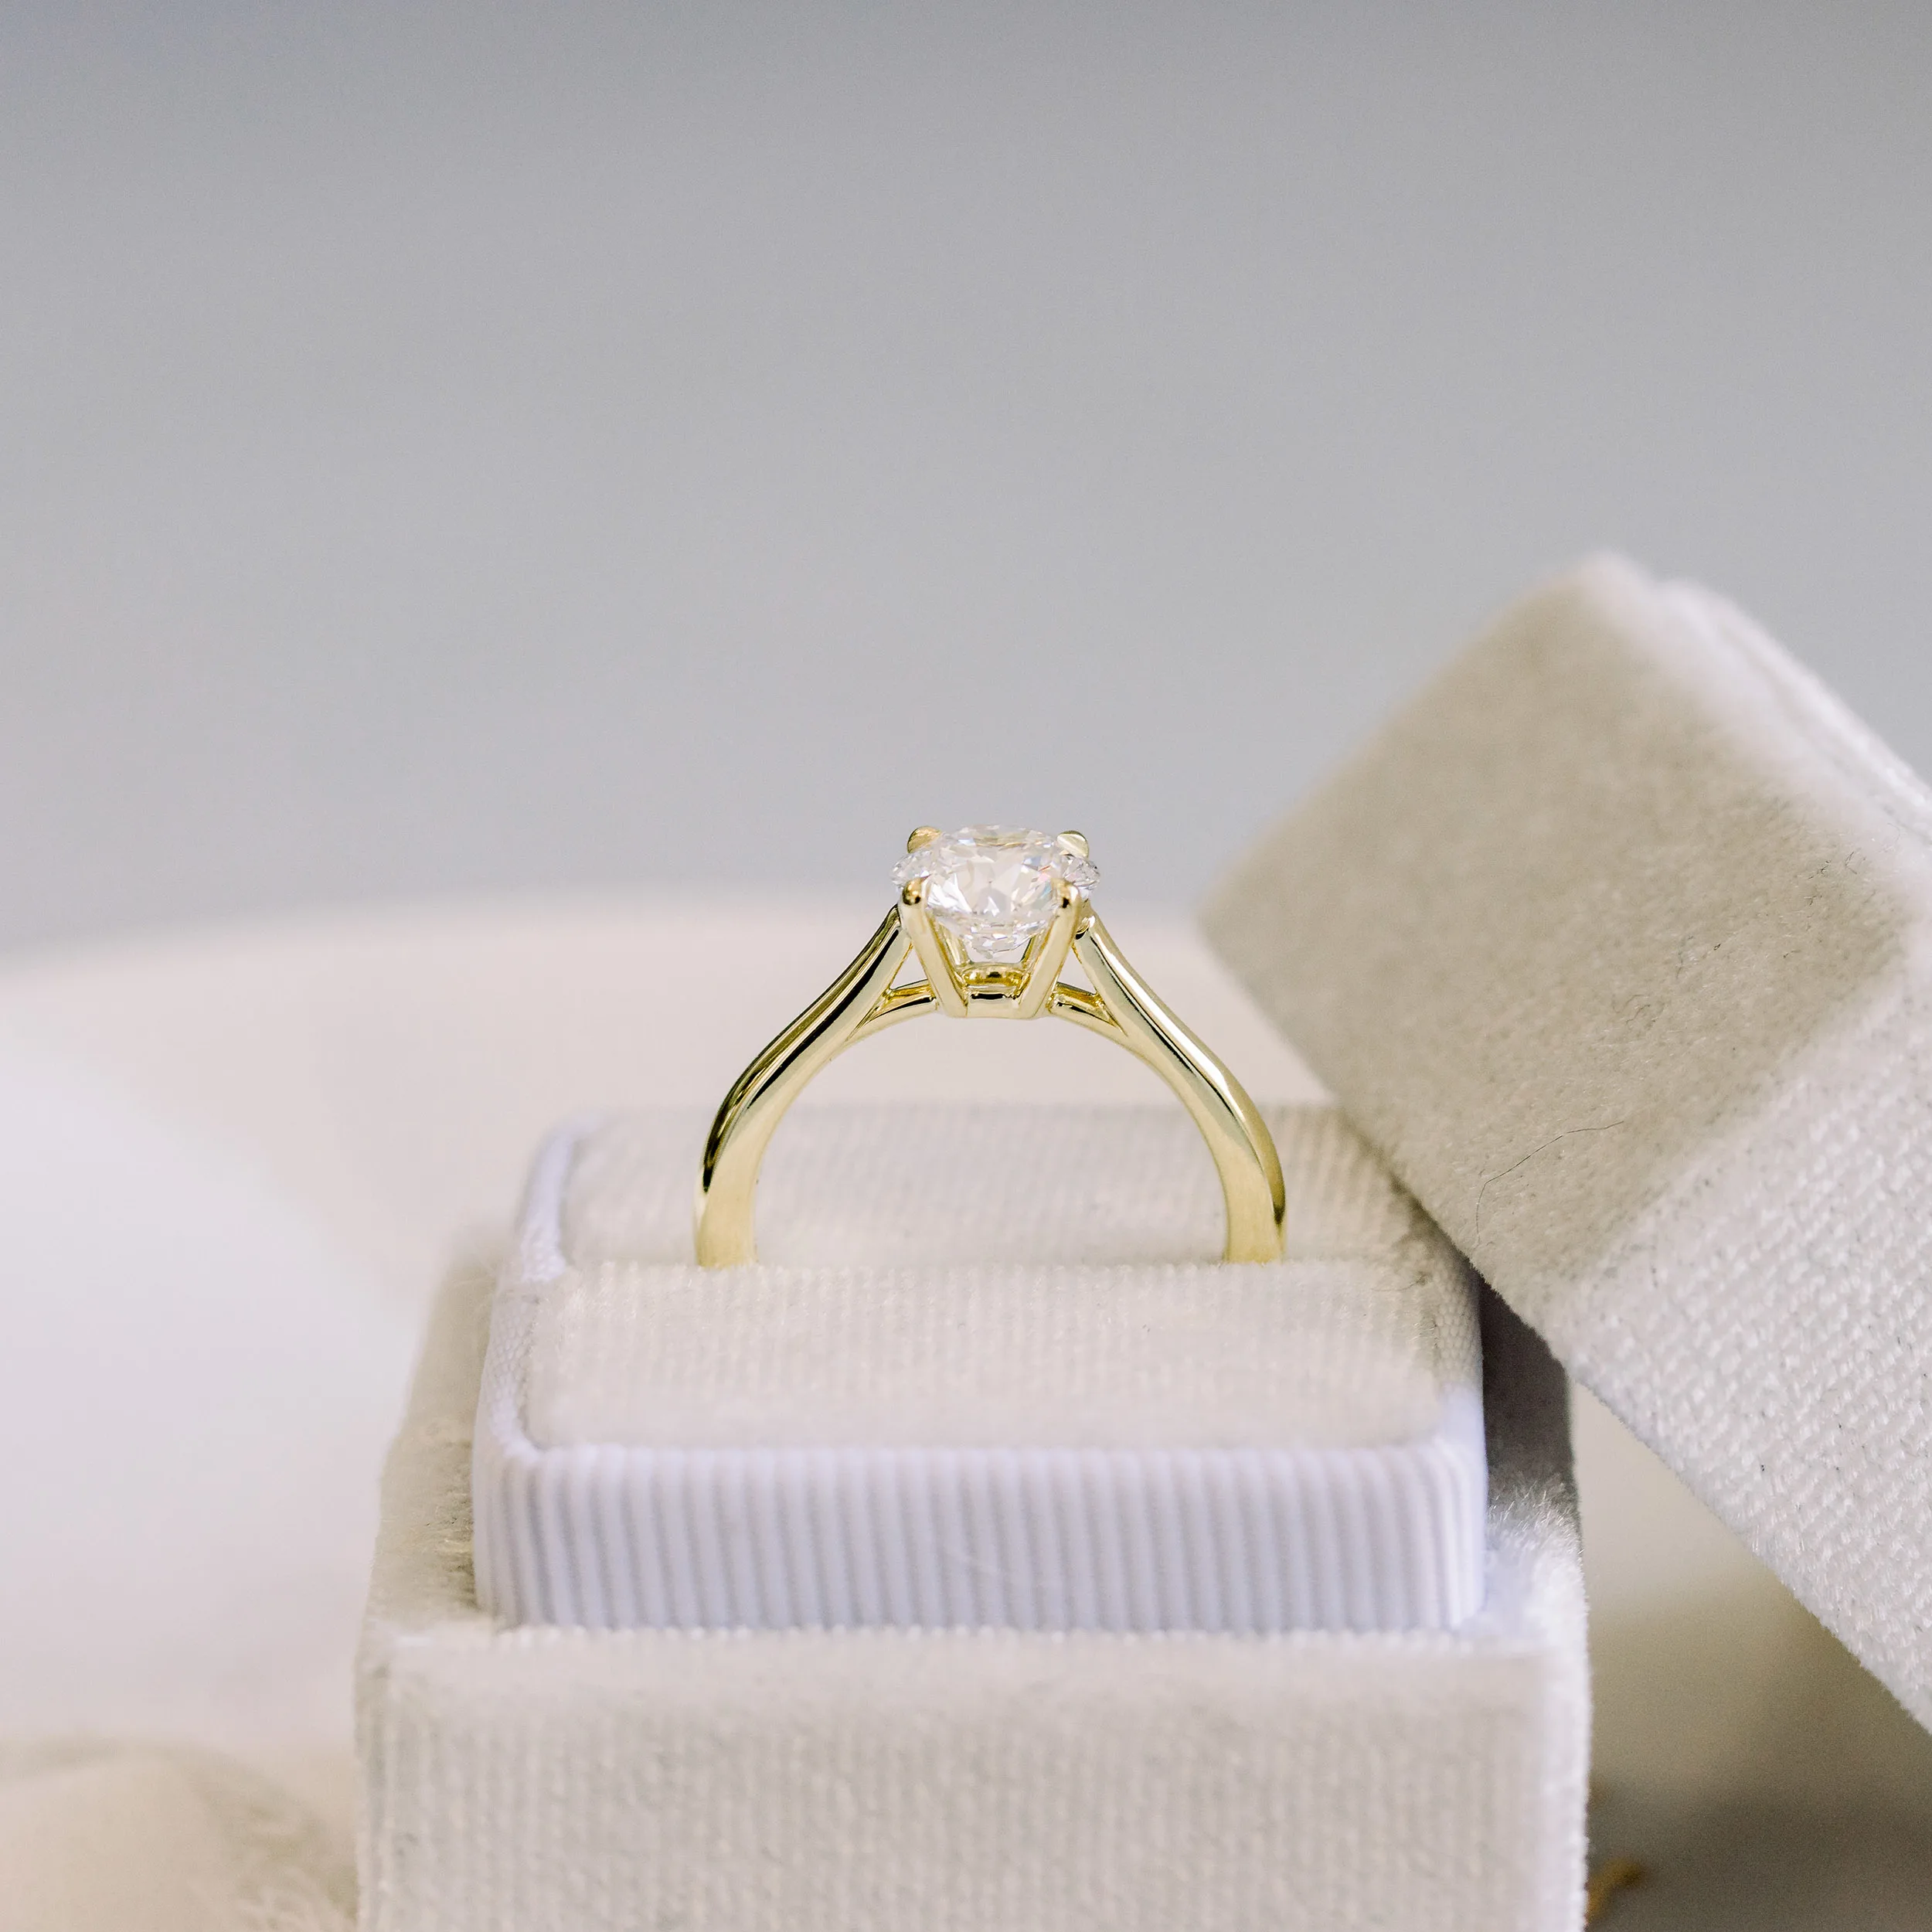 1.25 Carat Diamonds set in Yellow Gold Round Cathedral Solitaire (Side View)